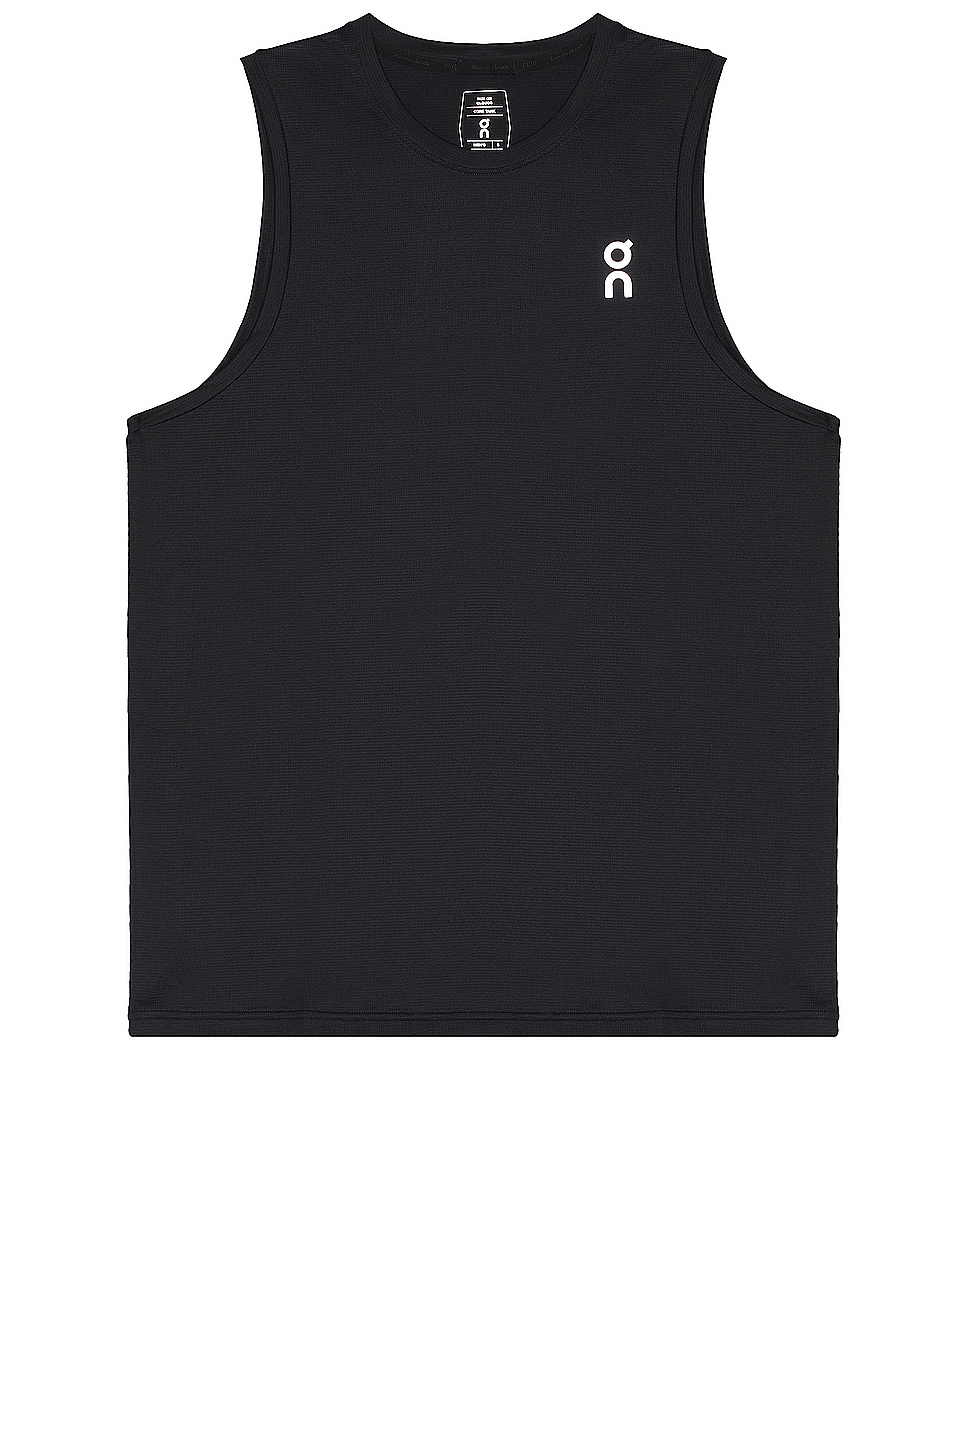 Image 1 of On Core Tank in Black